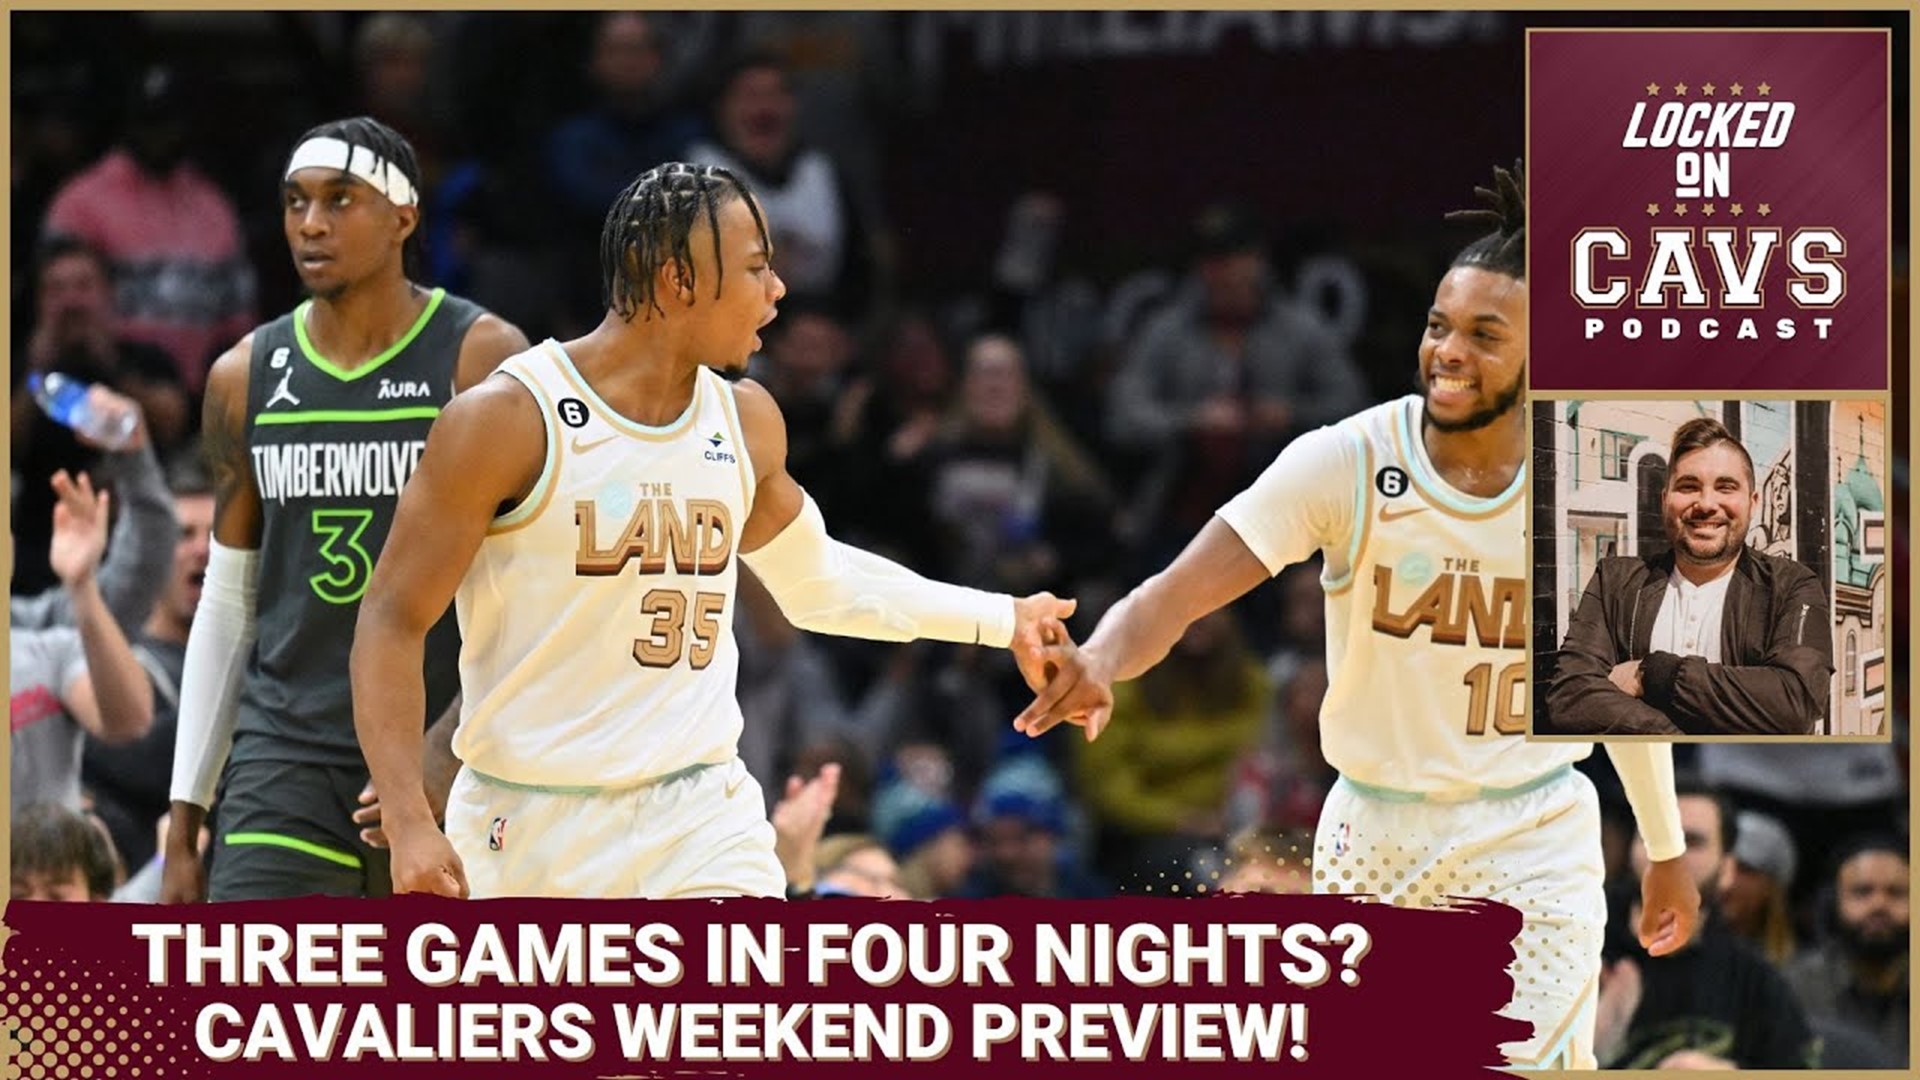 Evan Dammarell talks about the Cleveland Cavaliers' upcoming weekend schedule as they play three games in four nights.